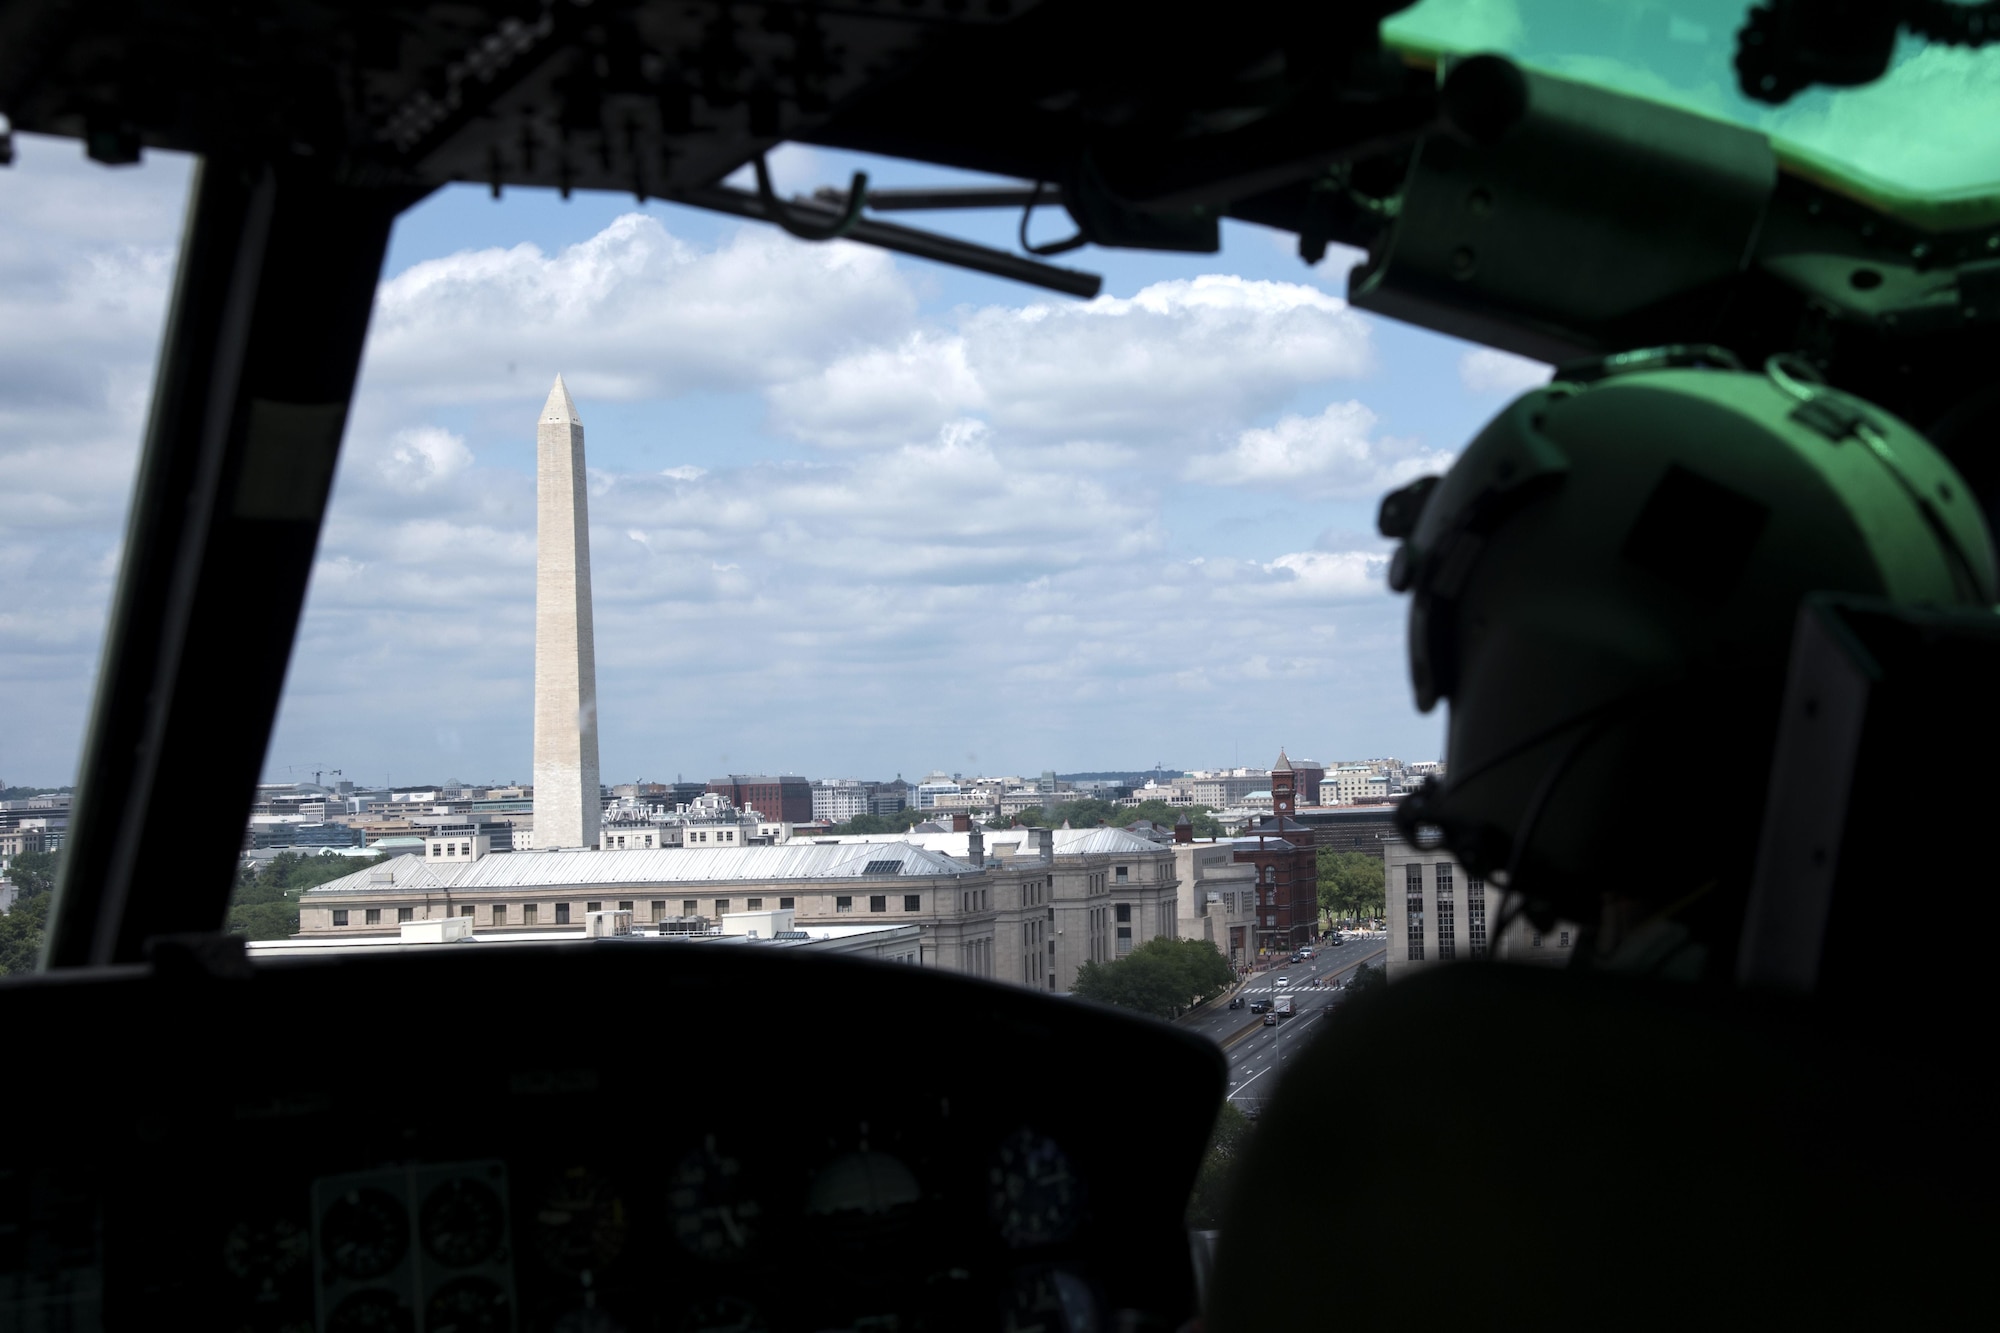 Capt. Brittny Barney, 1st Helicopter Squadron pilot, flies over Washington, D.C., in a UH-1N Huey helicopter Aug. 3, 2016. The 1st HS conducts high-priority airlift missions in the National Capitol Region and maintains the capability to provide defense support to civilian authorities in the event of a disaster. (U.S. Air Force photo by Airman 1st Class Philip Bryant)